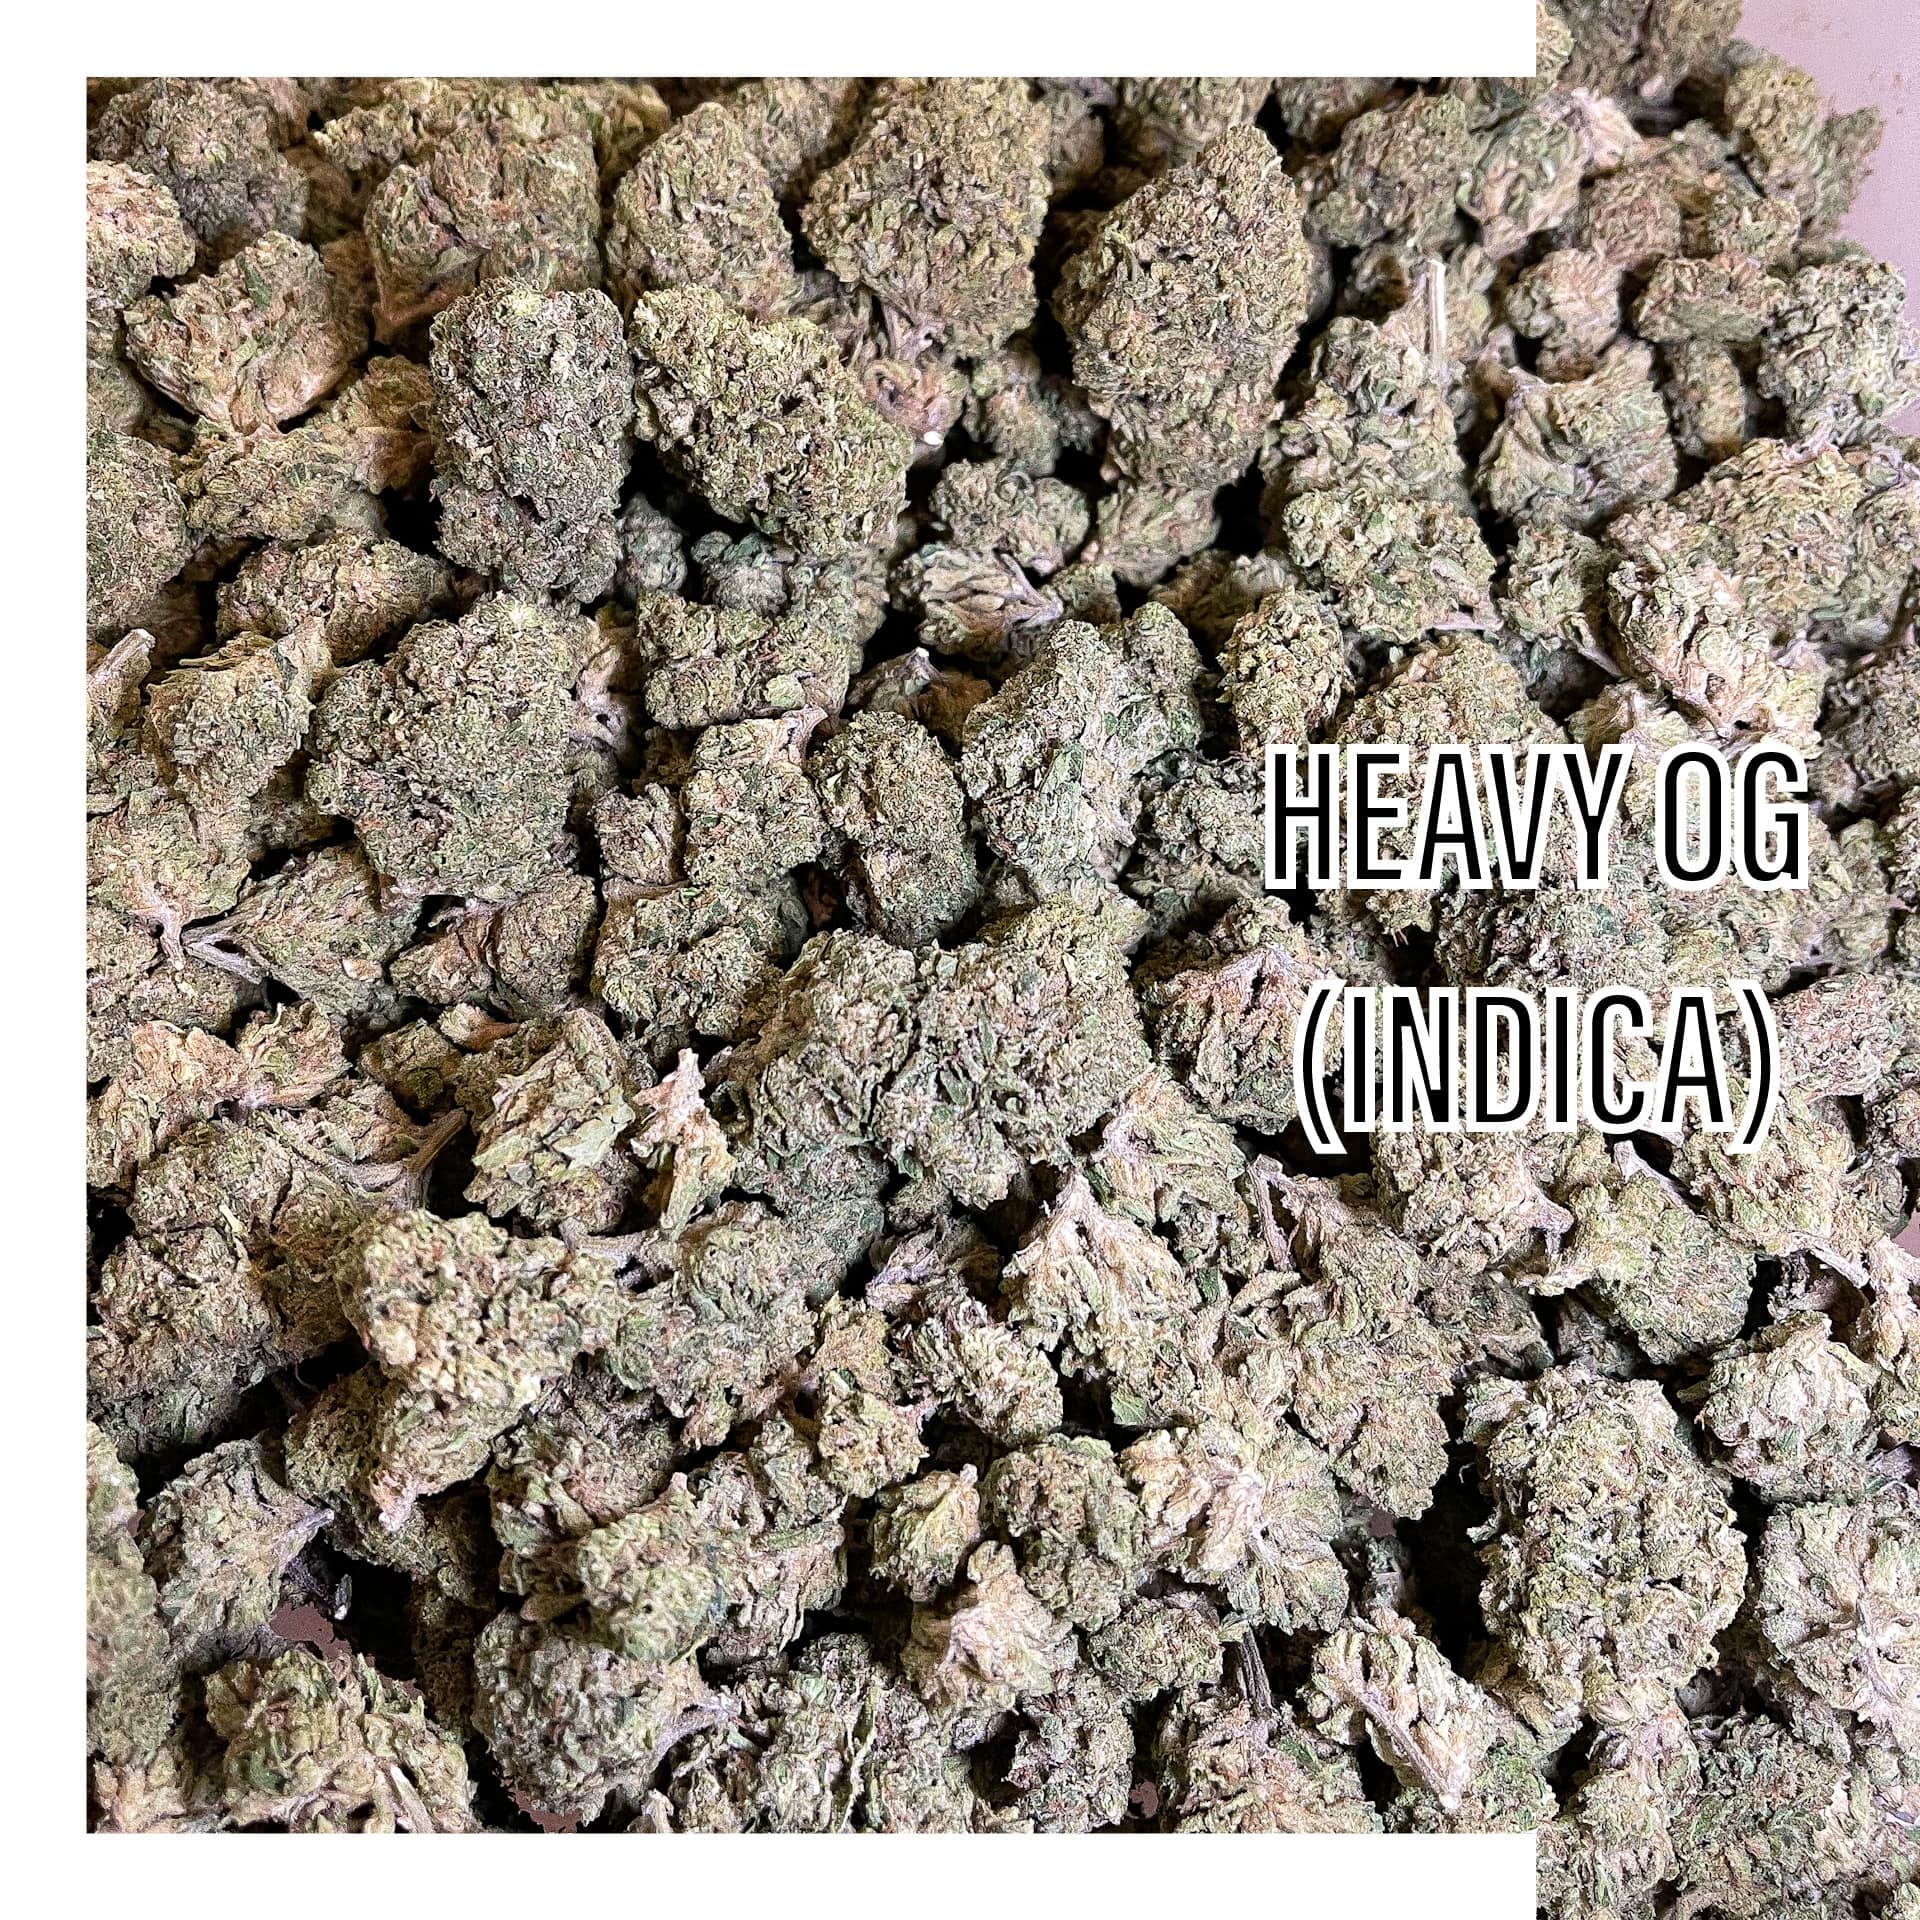 heavy OG Indica strain for depression and anxiety